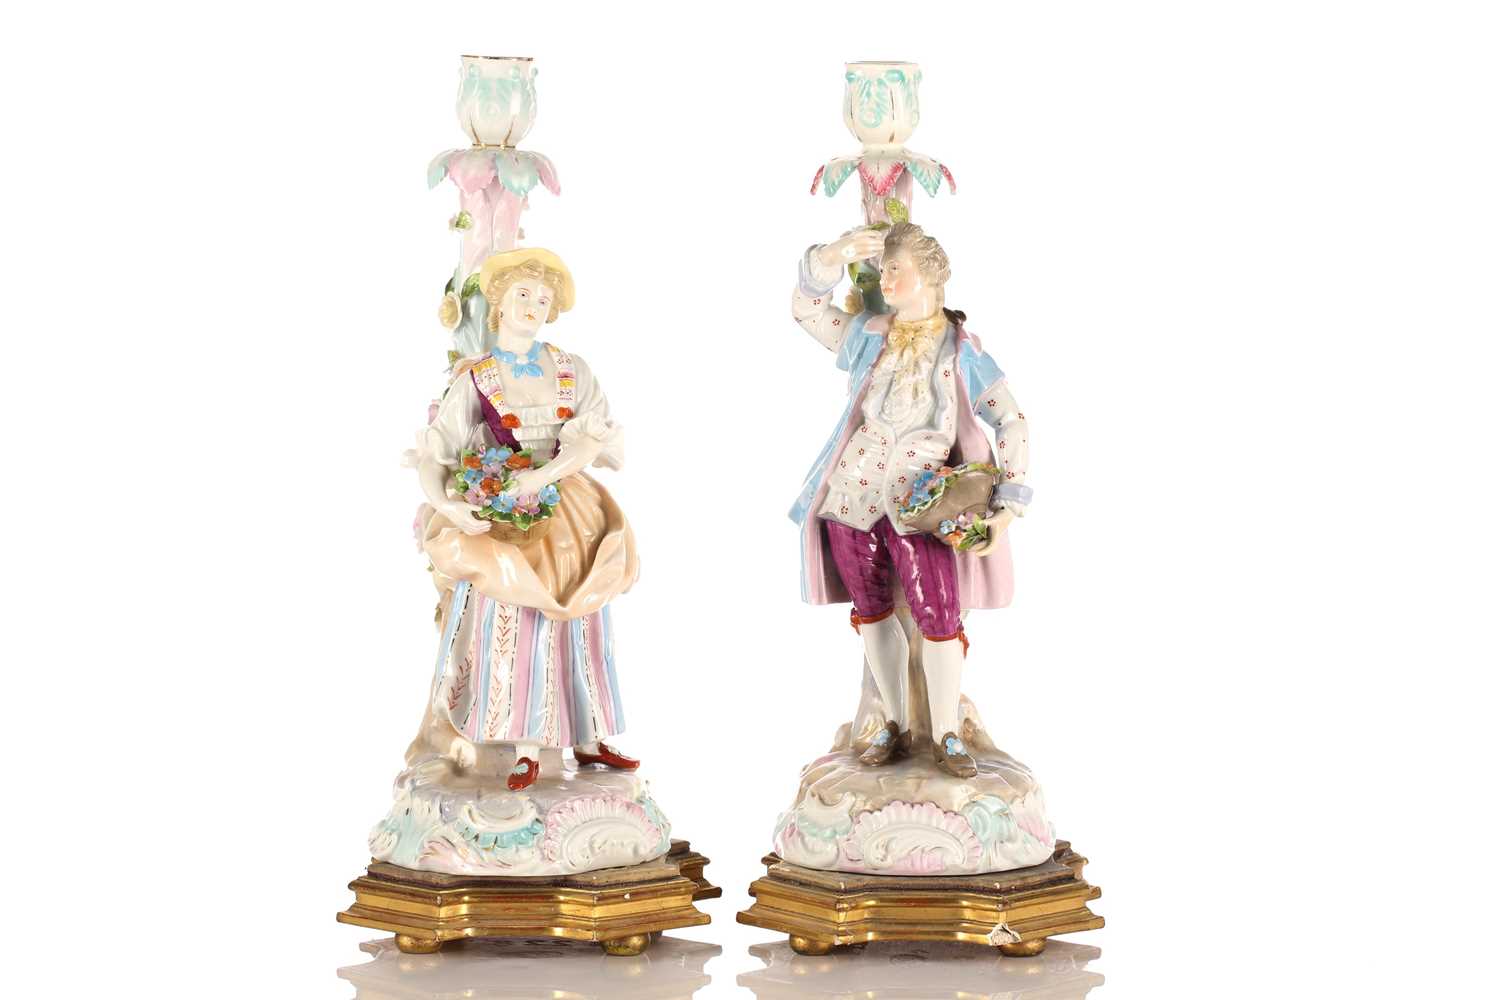 A pair of Continental porcelain figural candlesticks, late 19th century, possibly Volkstedt, mounted